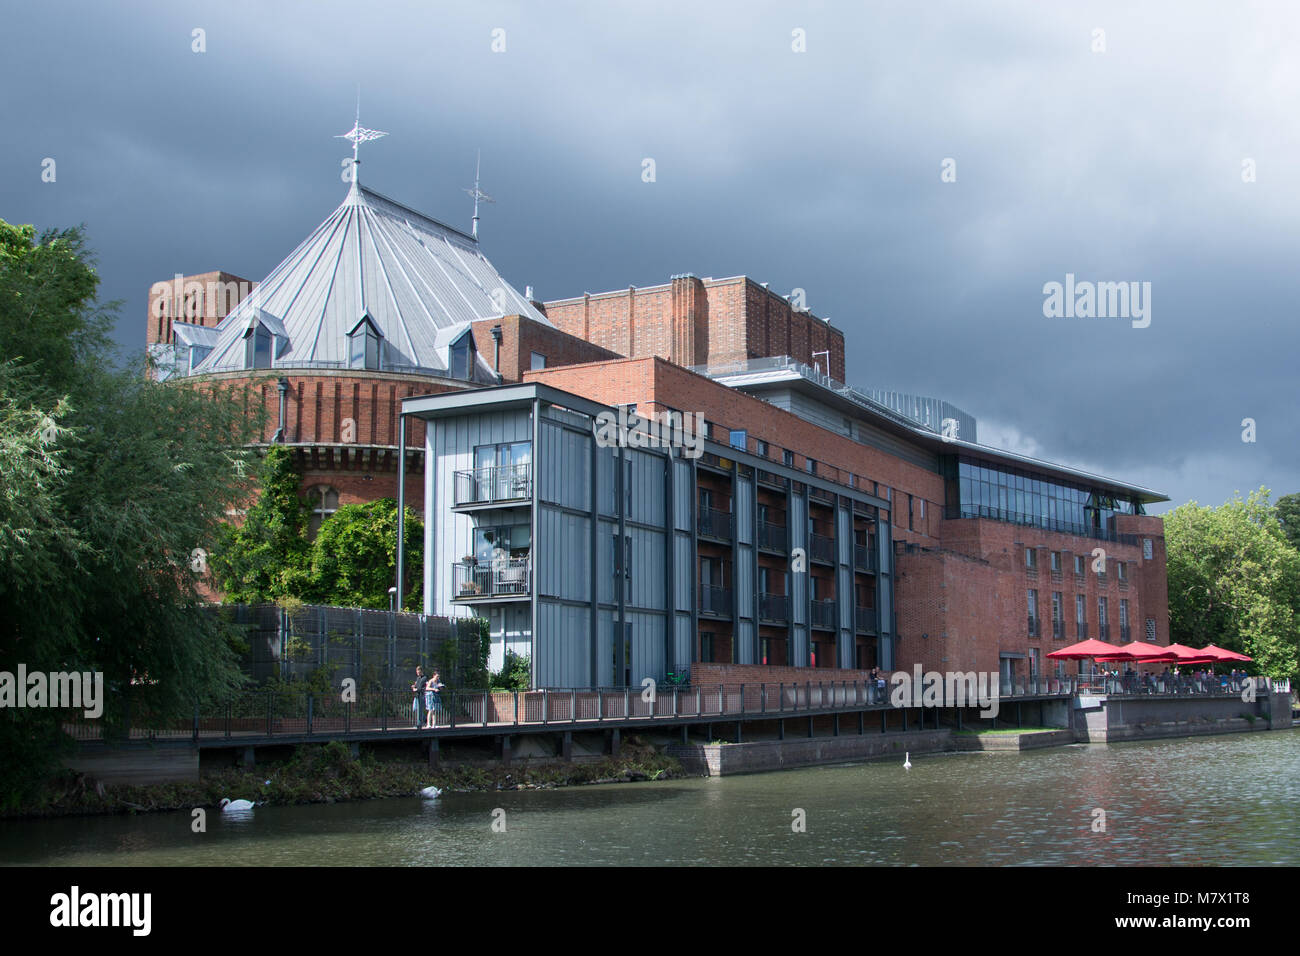 view of the RSC Royal Shakespeare Theatre Stratford upon Avon from the river with dark stormy clouds in the background. Stock Photo